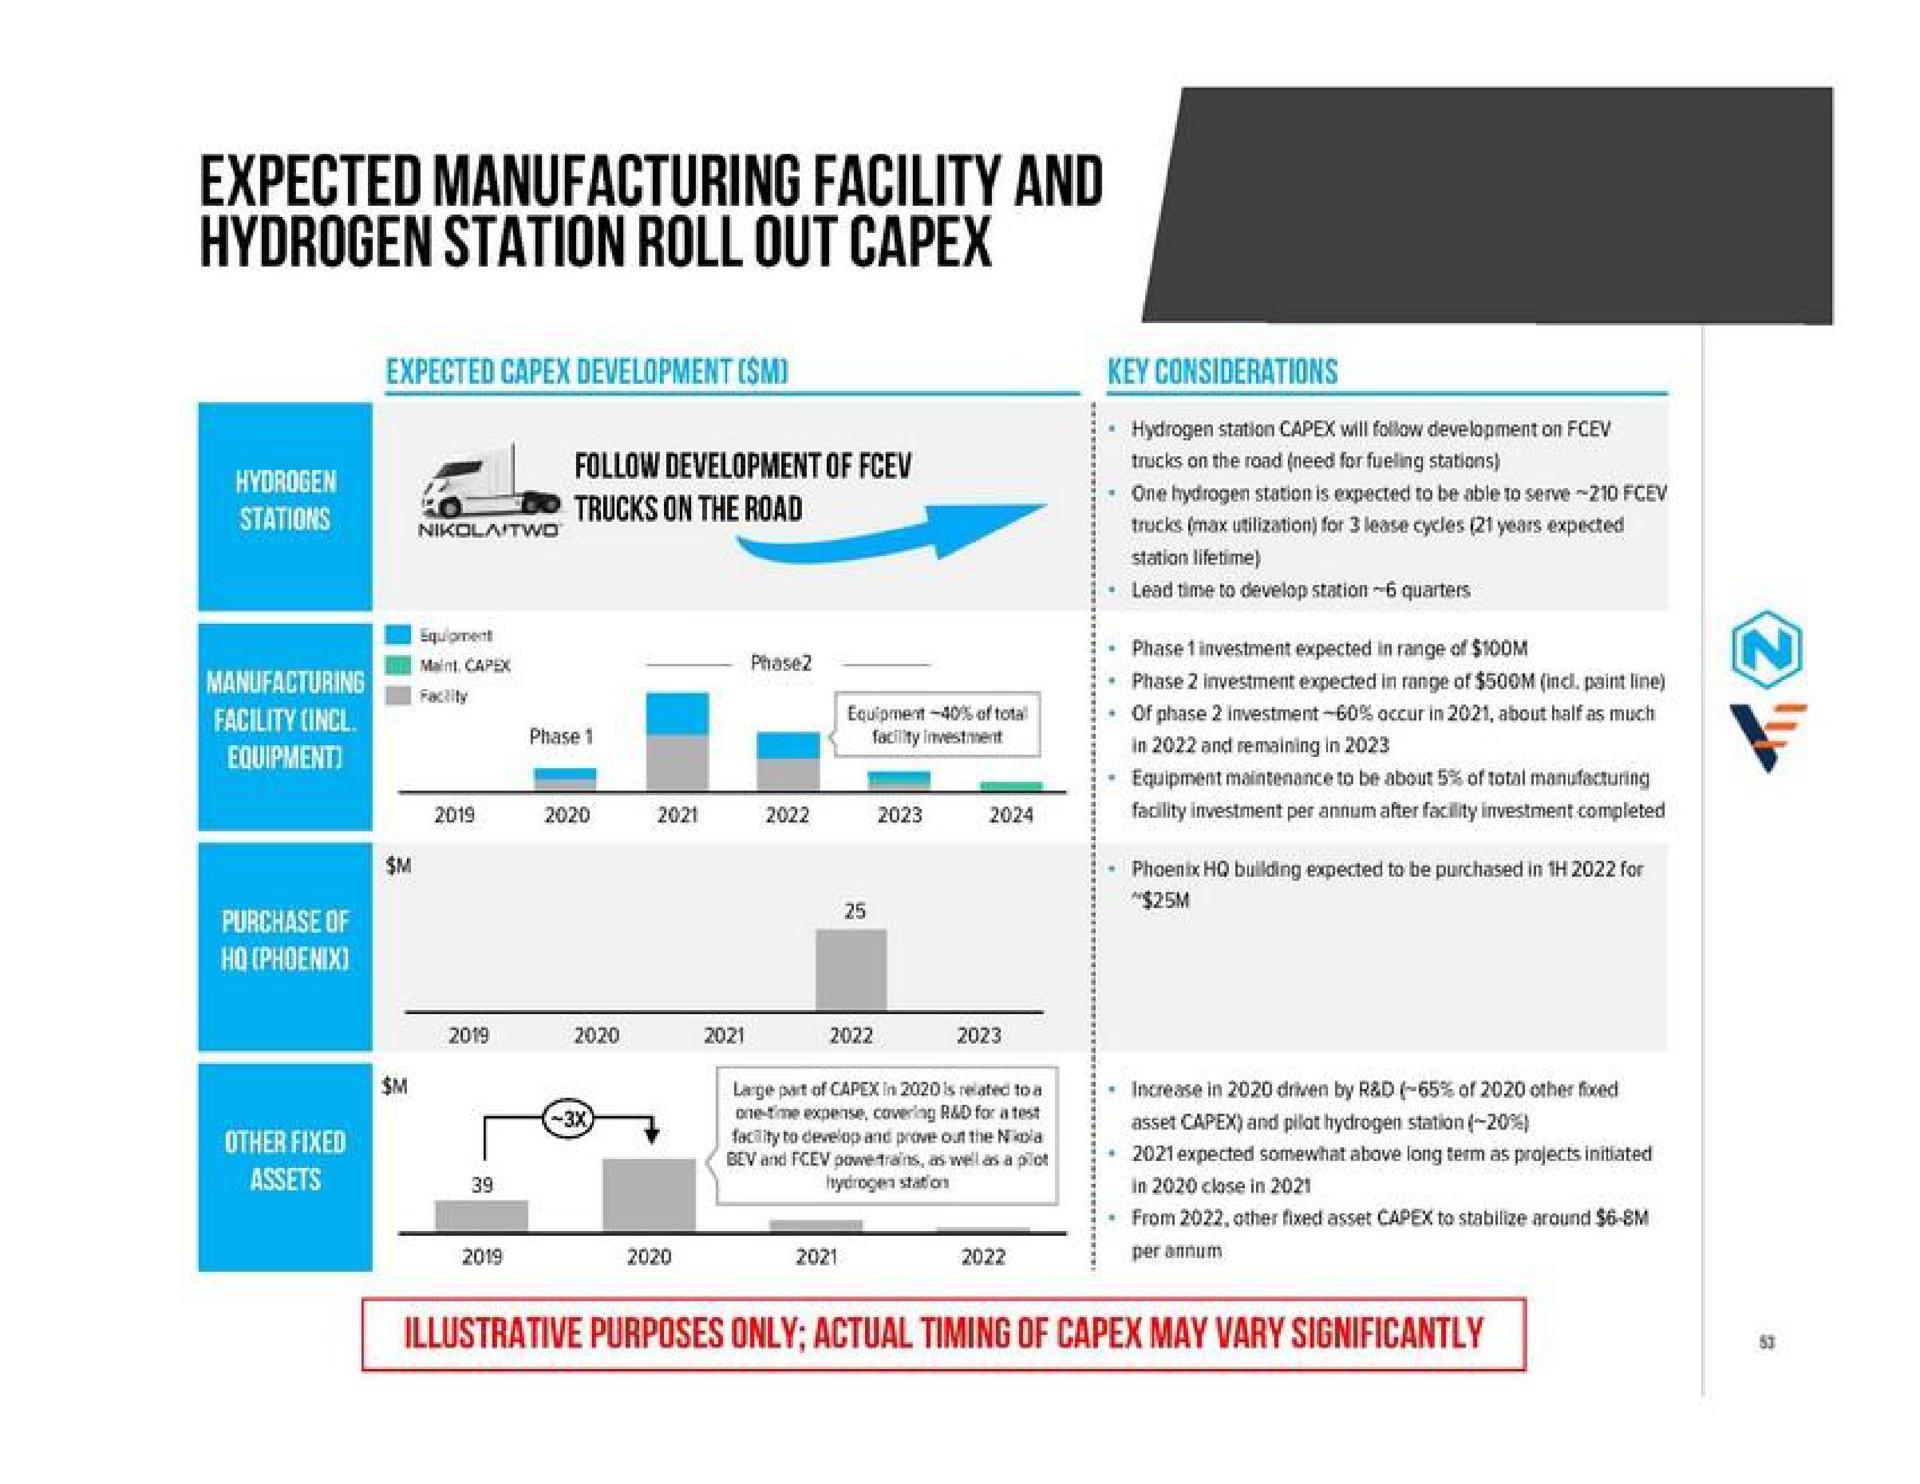 expected manufacturing facility and hydrogen station roll out expected development key considerations | Nikola